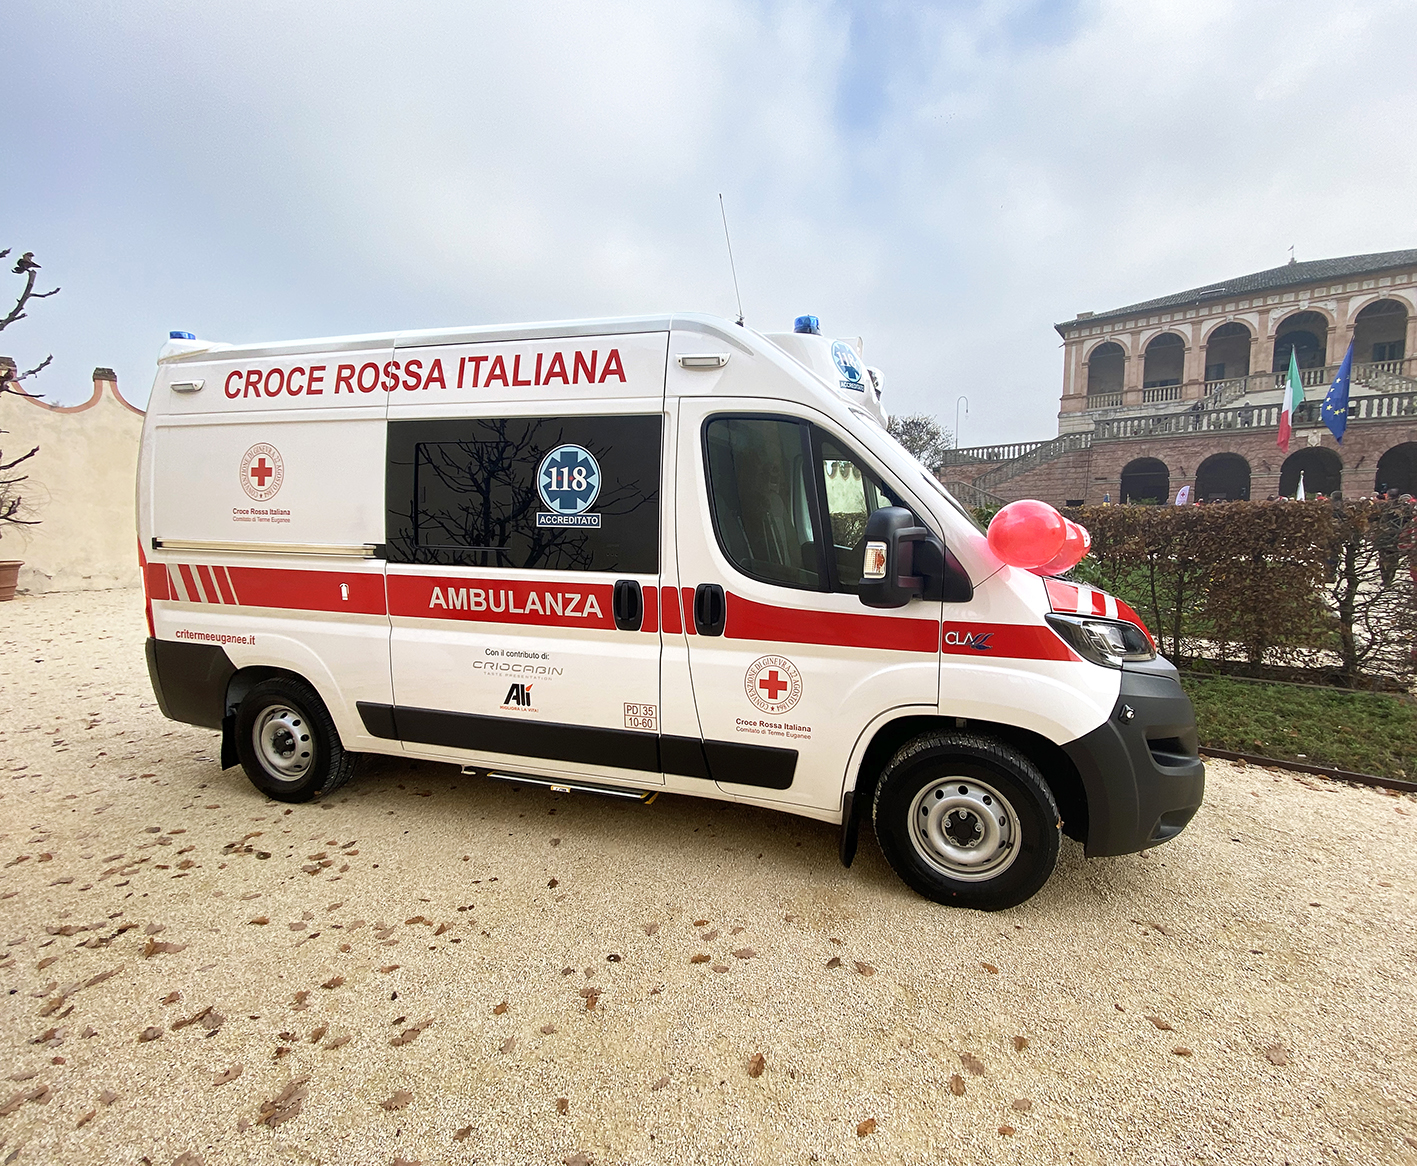 Opdagelse Absay Adept A new ambulance for the Italian Red Cross – Criocabin